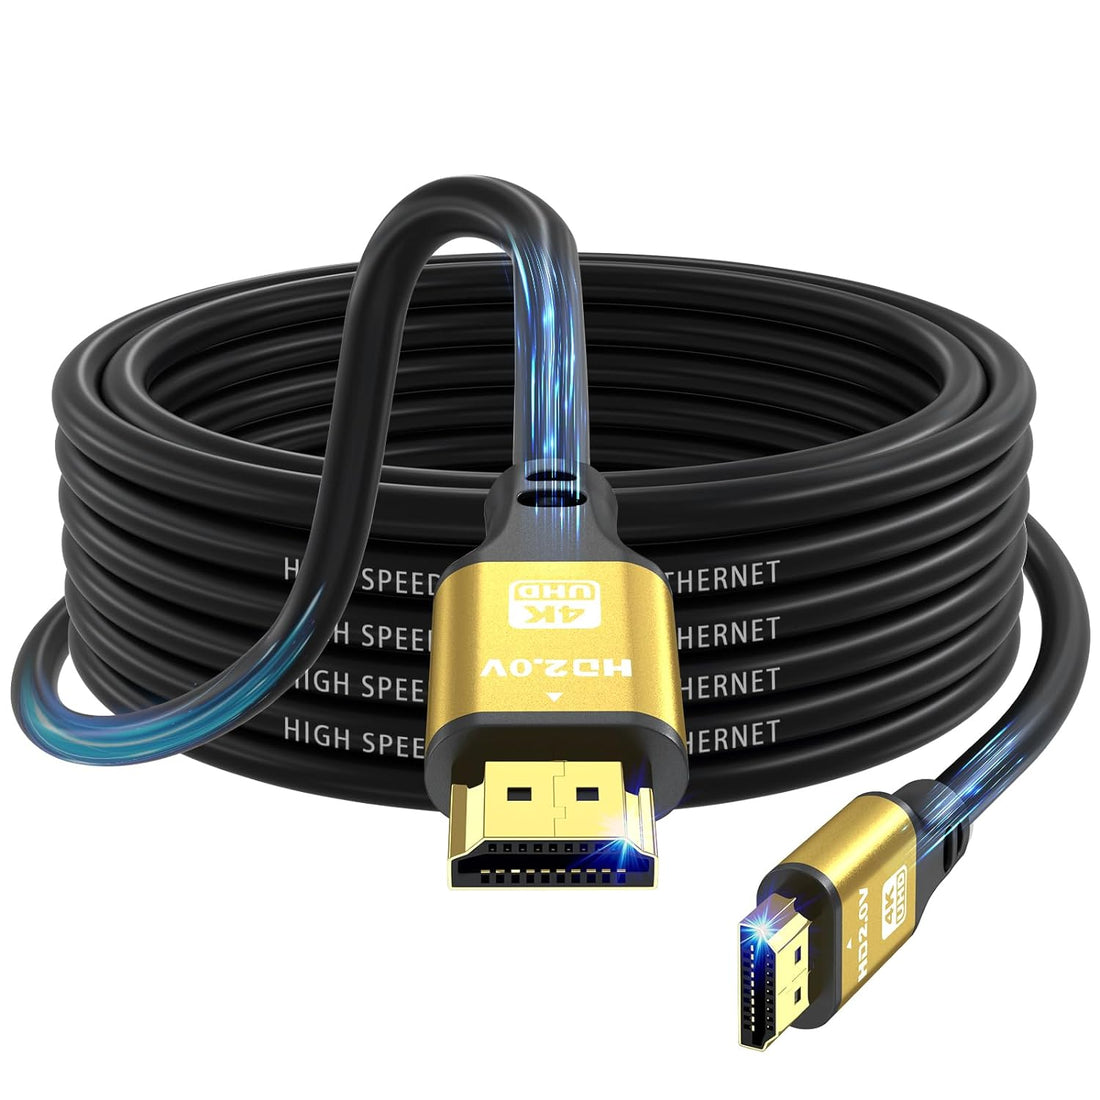 jojobnj HDMI Cable 25ft, 4K@60Hz, 18Gbps High Speed HDMI 2.0 Cord, Ultra HD,Ethernet Audio Return,Video 4K,1080p,3D,Arc, HDR Compatible with Xbox,PS5/PS4,HDTV,Laptop ect(Gold)